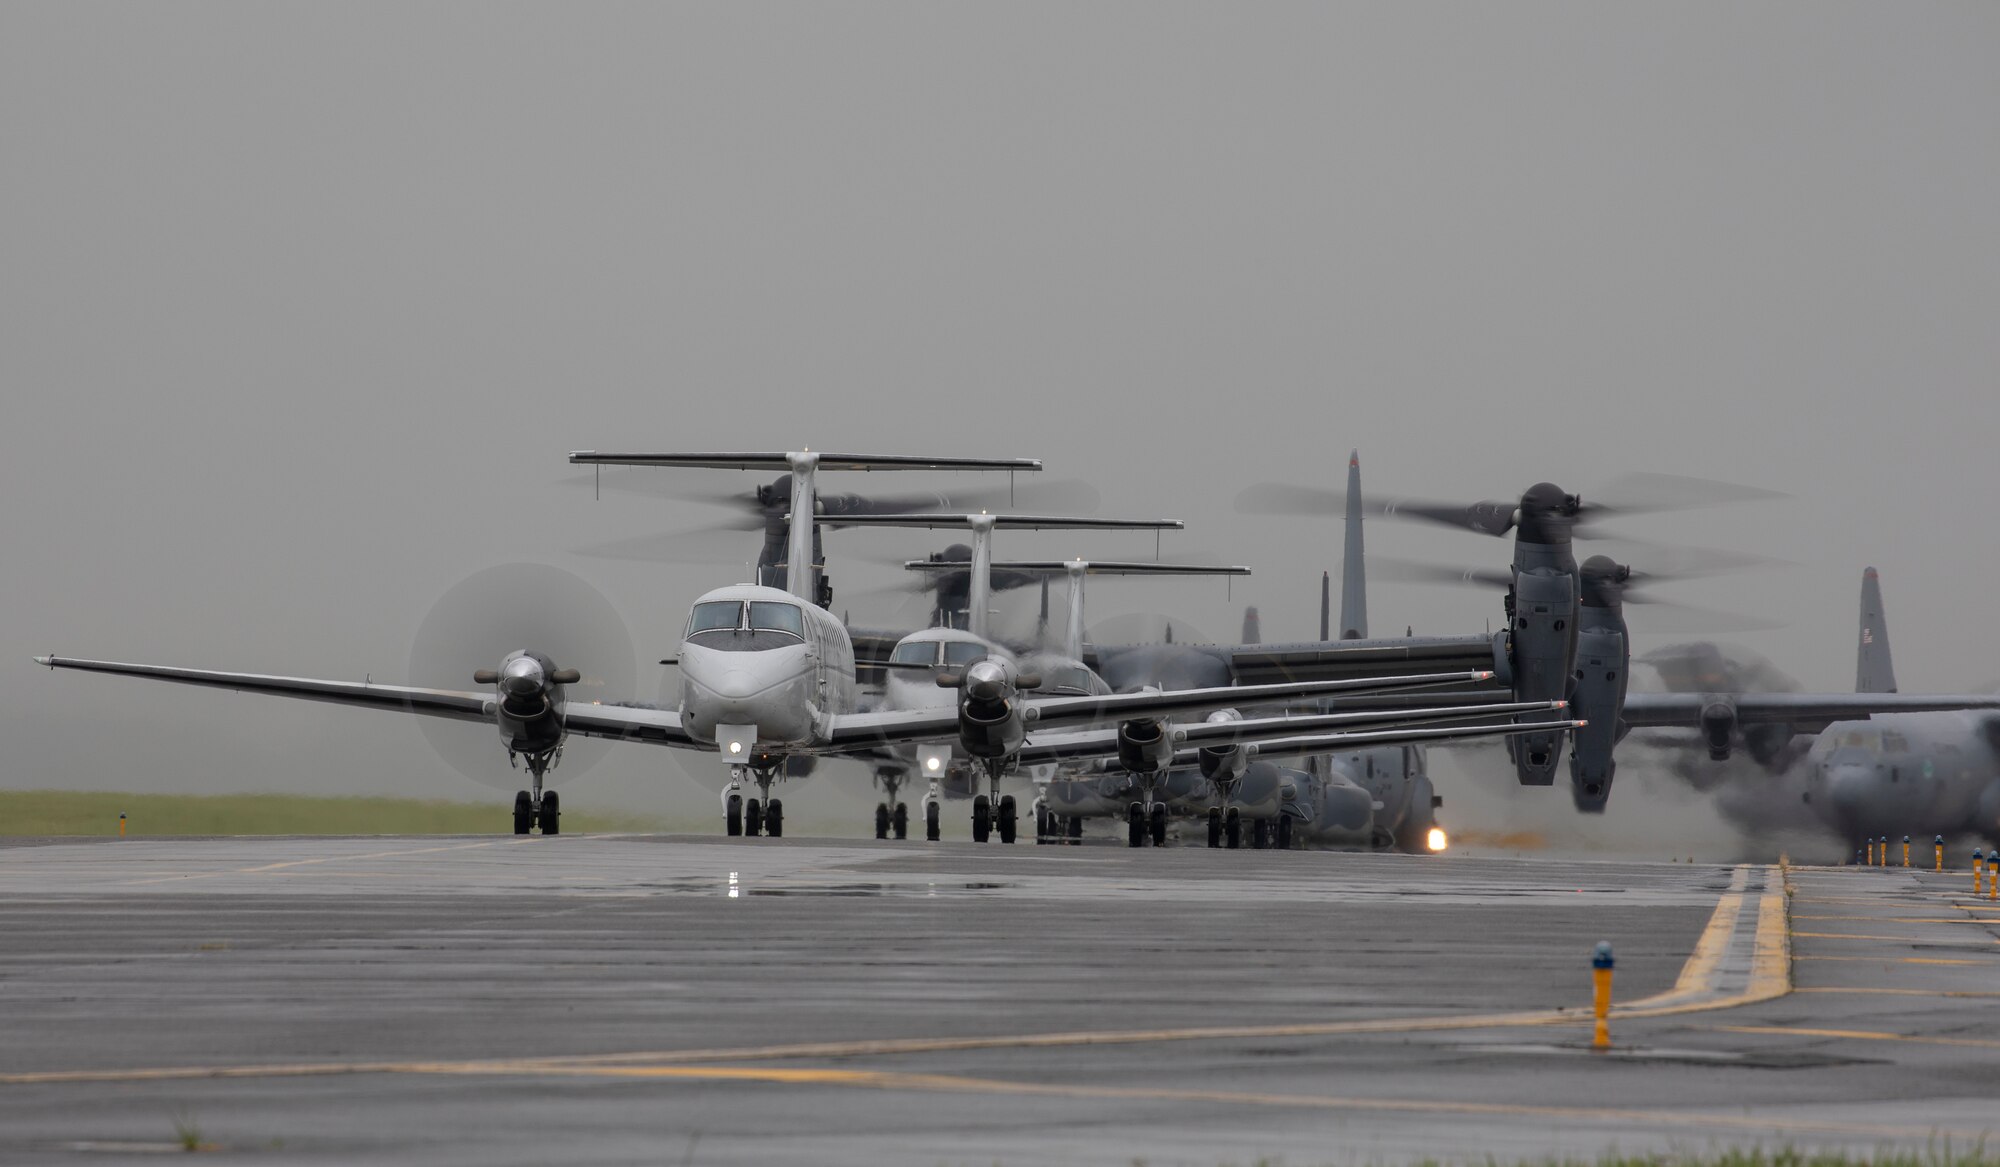 Aircraft from the 36th Airlift Squadron, 459th Airlift Squadron and 21st Special Operations Squadron taxi their way across the Yokota Air Base, Japan flightline during the elephant walk portion of the Samurai Surge training exercise, May 21, 2020.